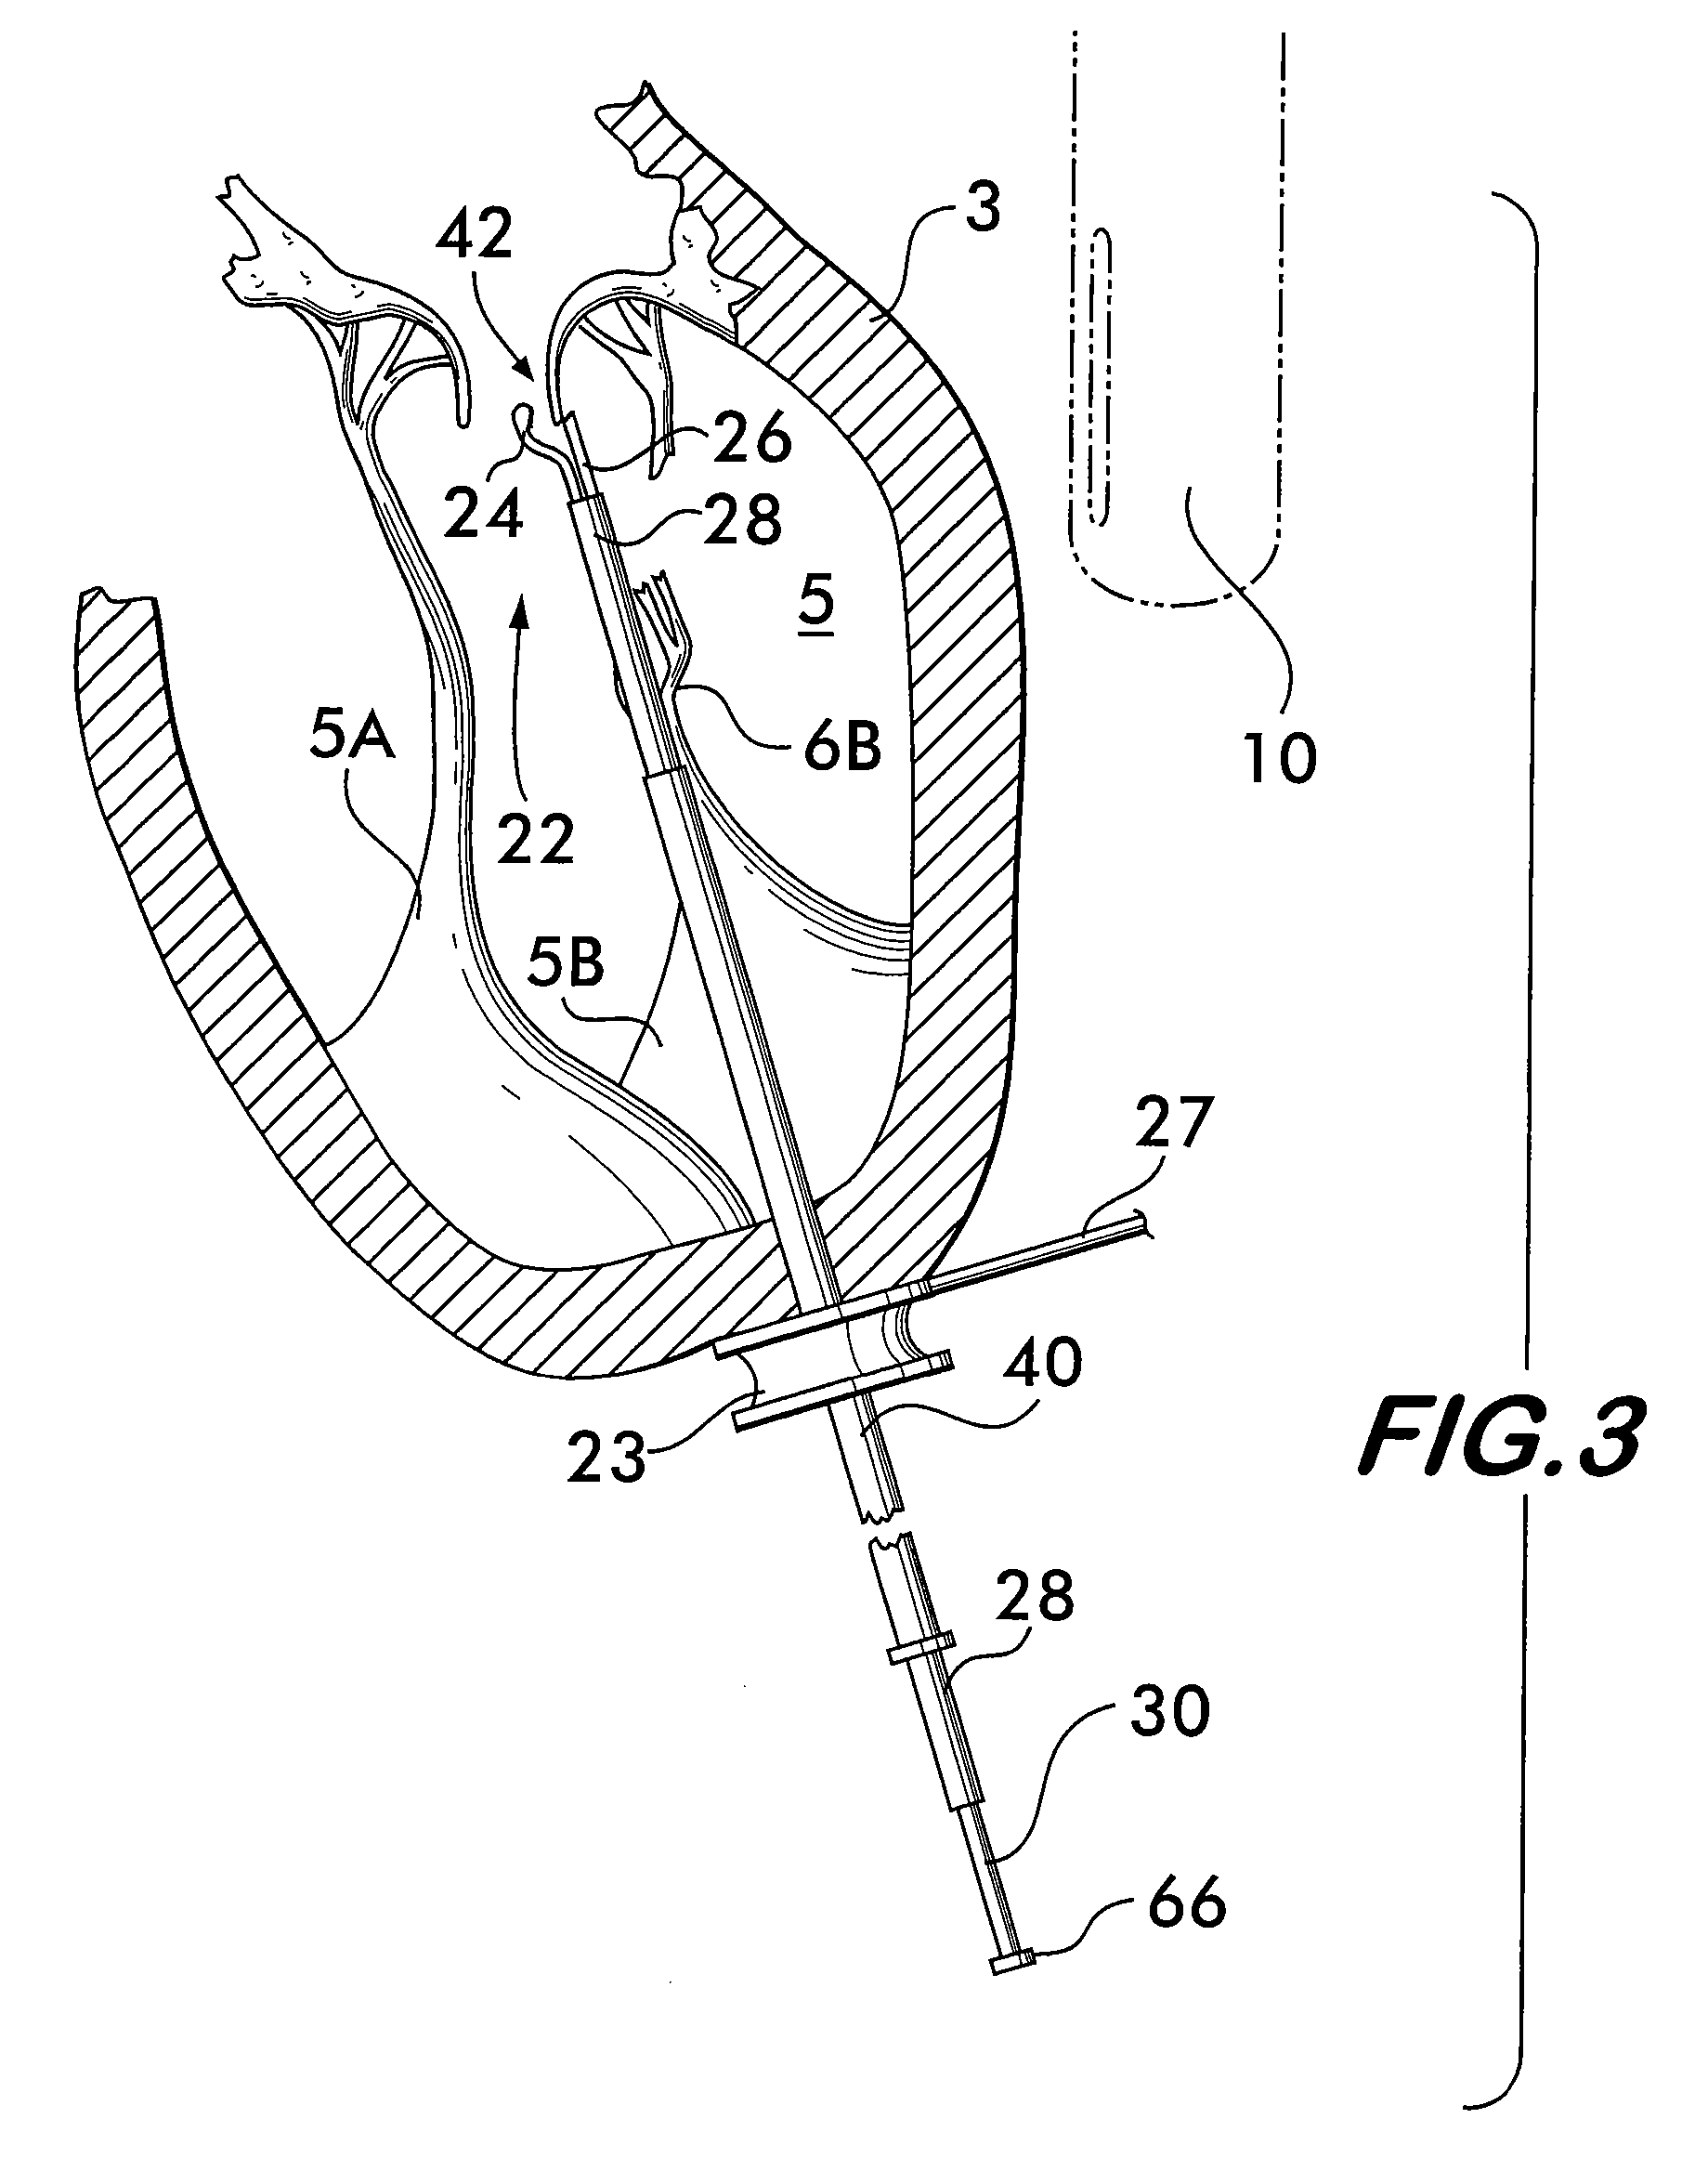 Apparatus and method for mitral valve repair without cardiopulmonary bypass, including transmural techniques